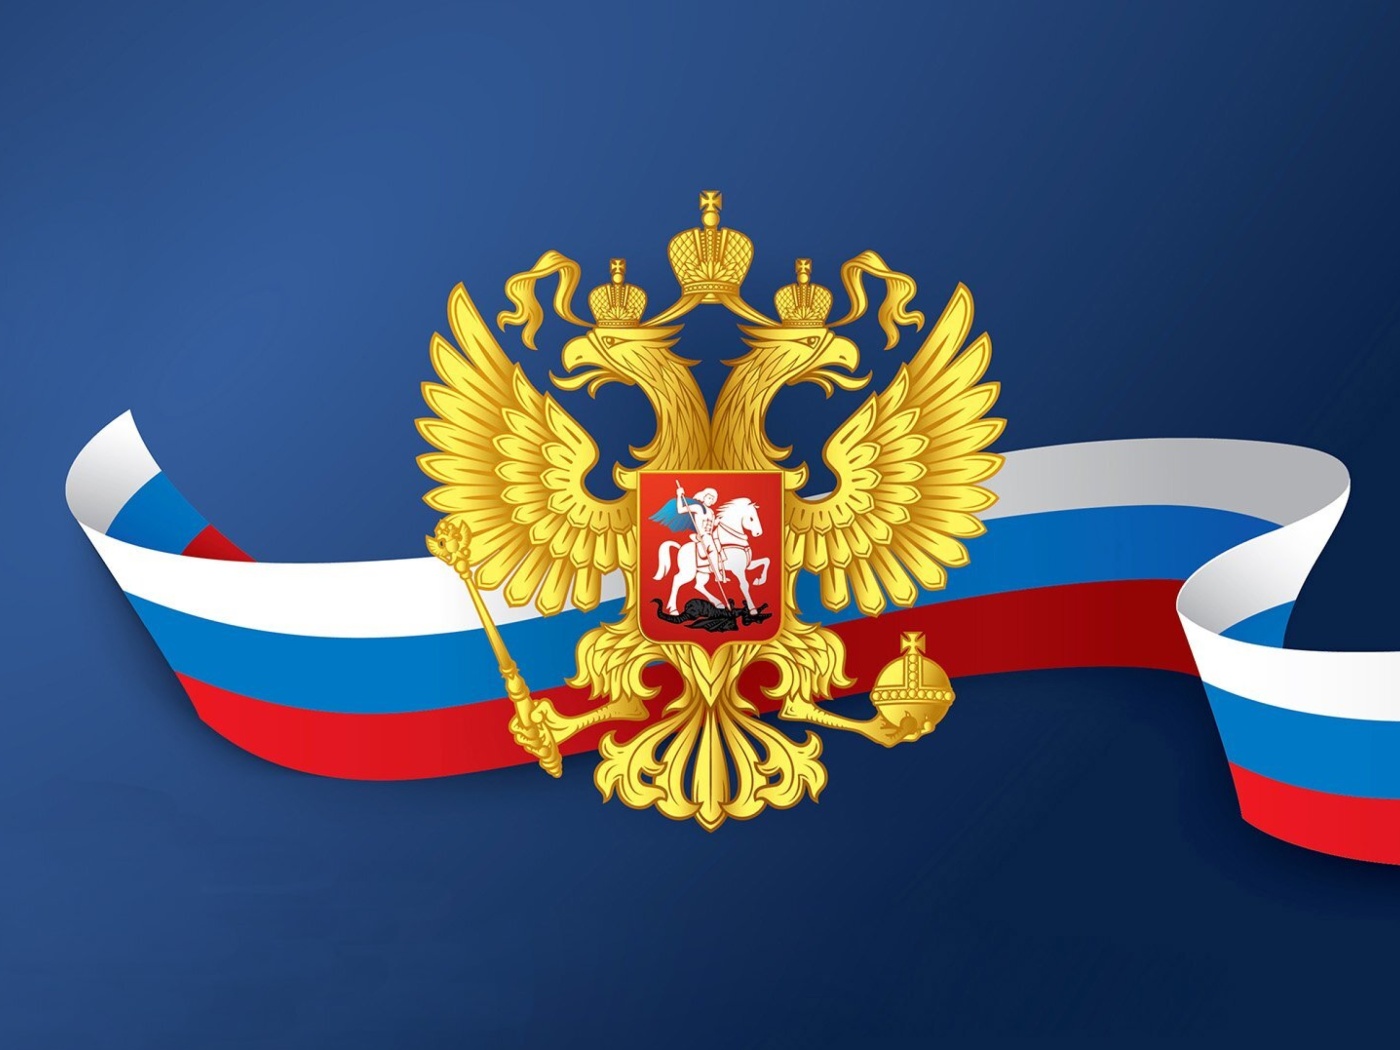 Das Russian coat of arms and flag Wallpaper 1400x1050